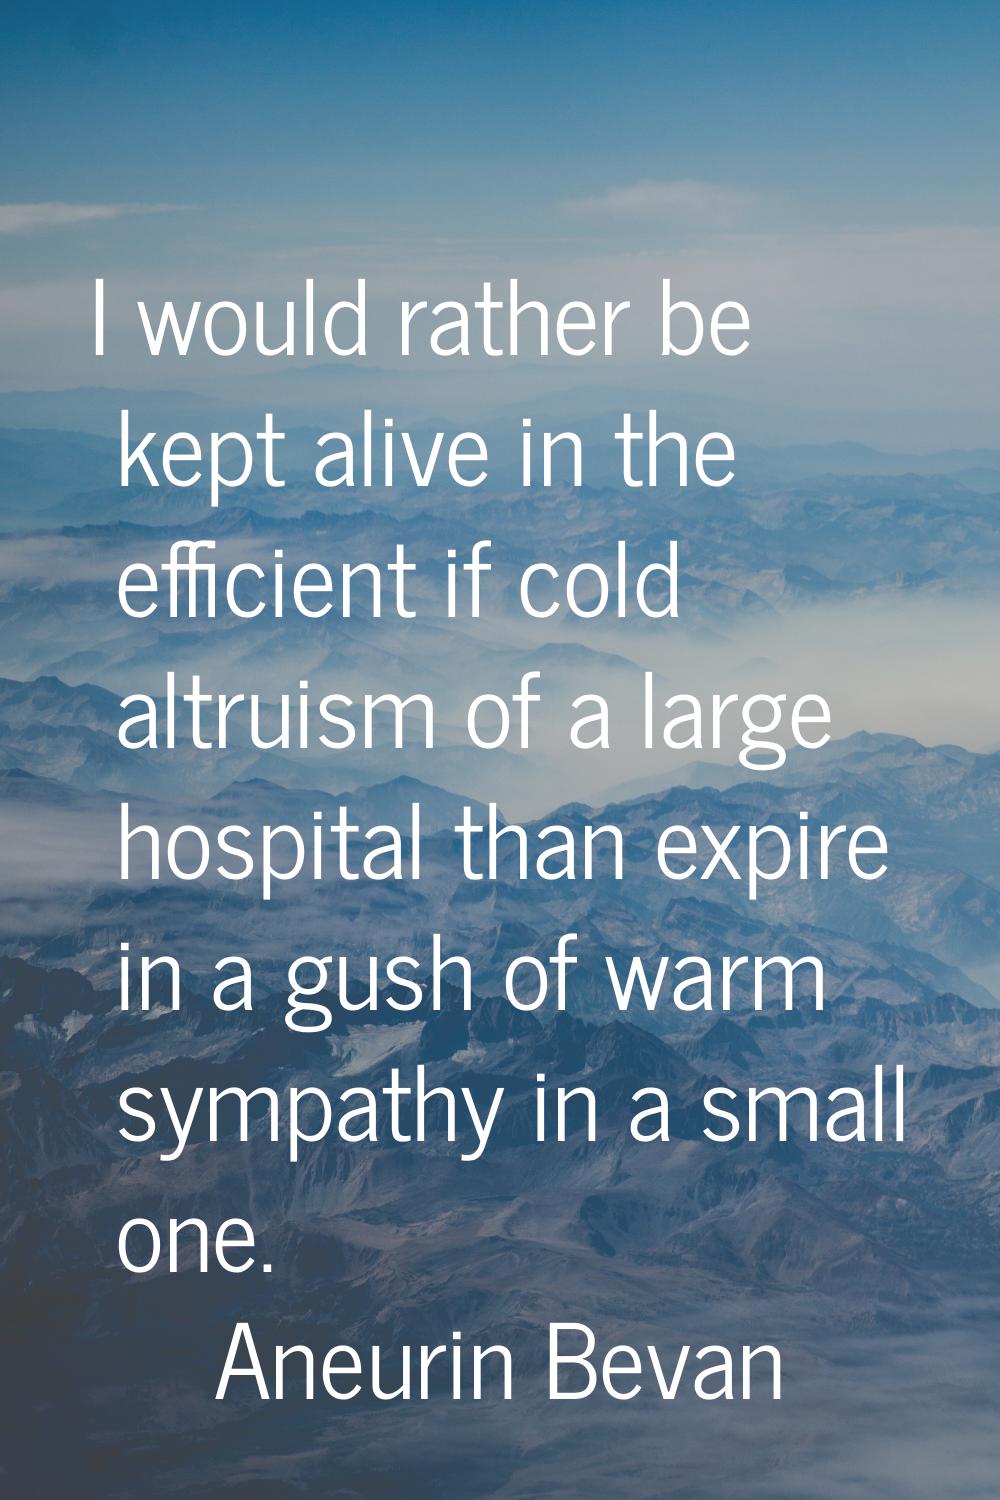 I would rather be kept alive in the efficient if cold altruism of a large hospital than expire in a